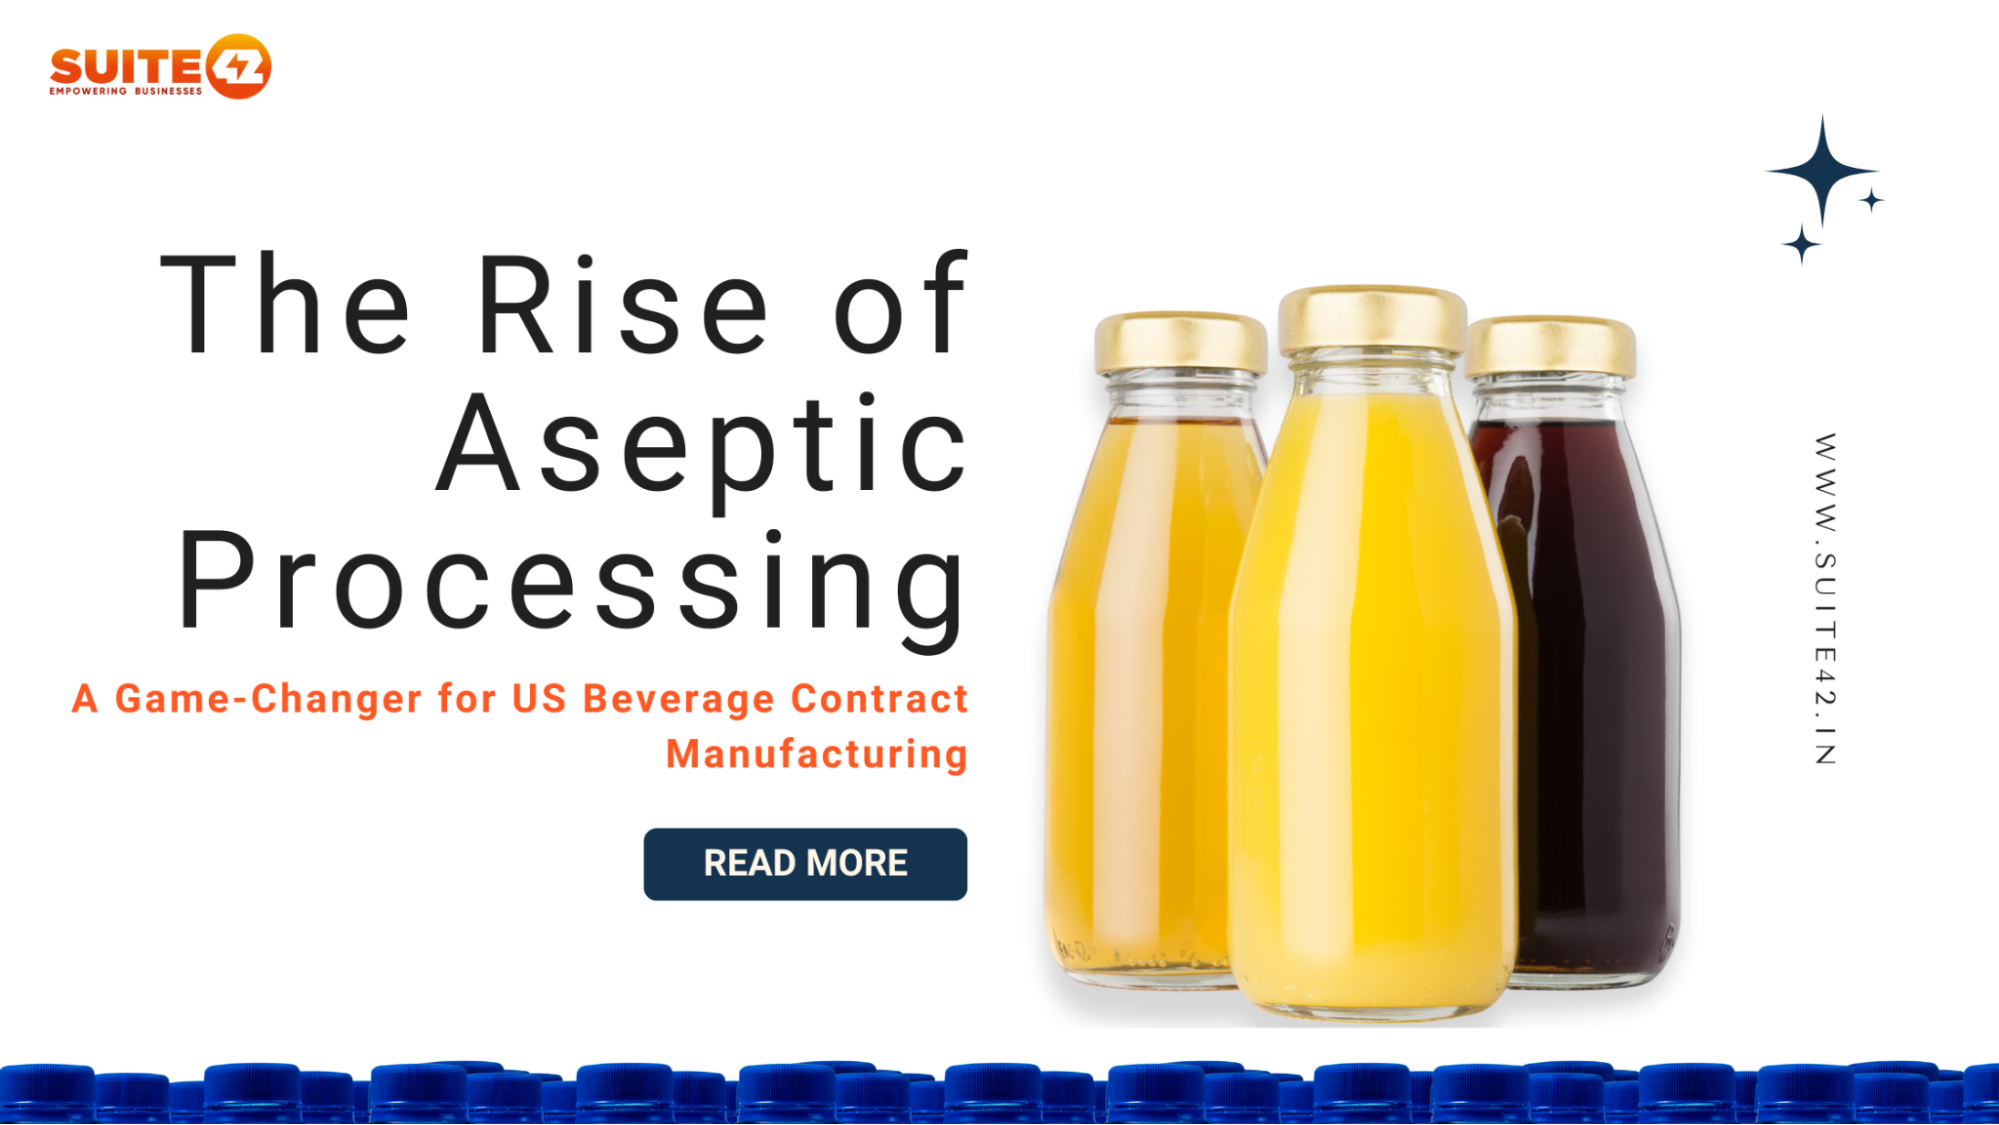 Aseptic Processing: A Game-Changer for US Beverage Contract Manufacturing